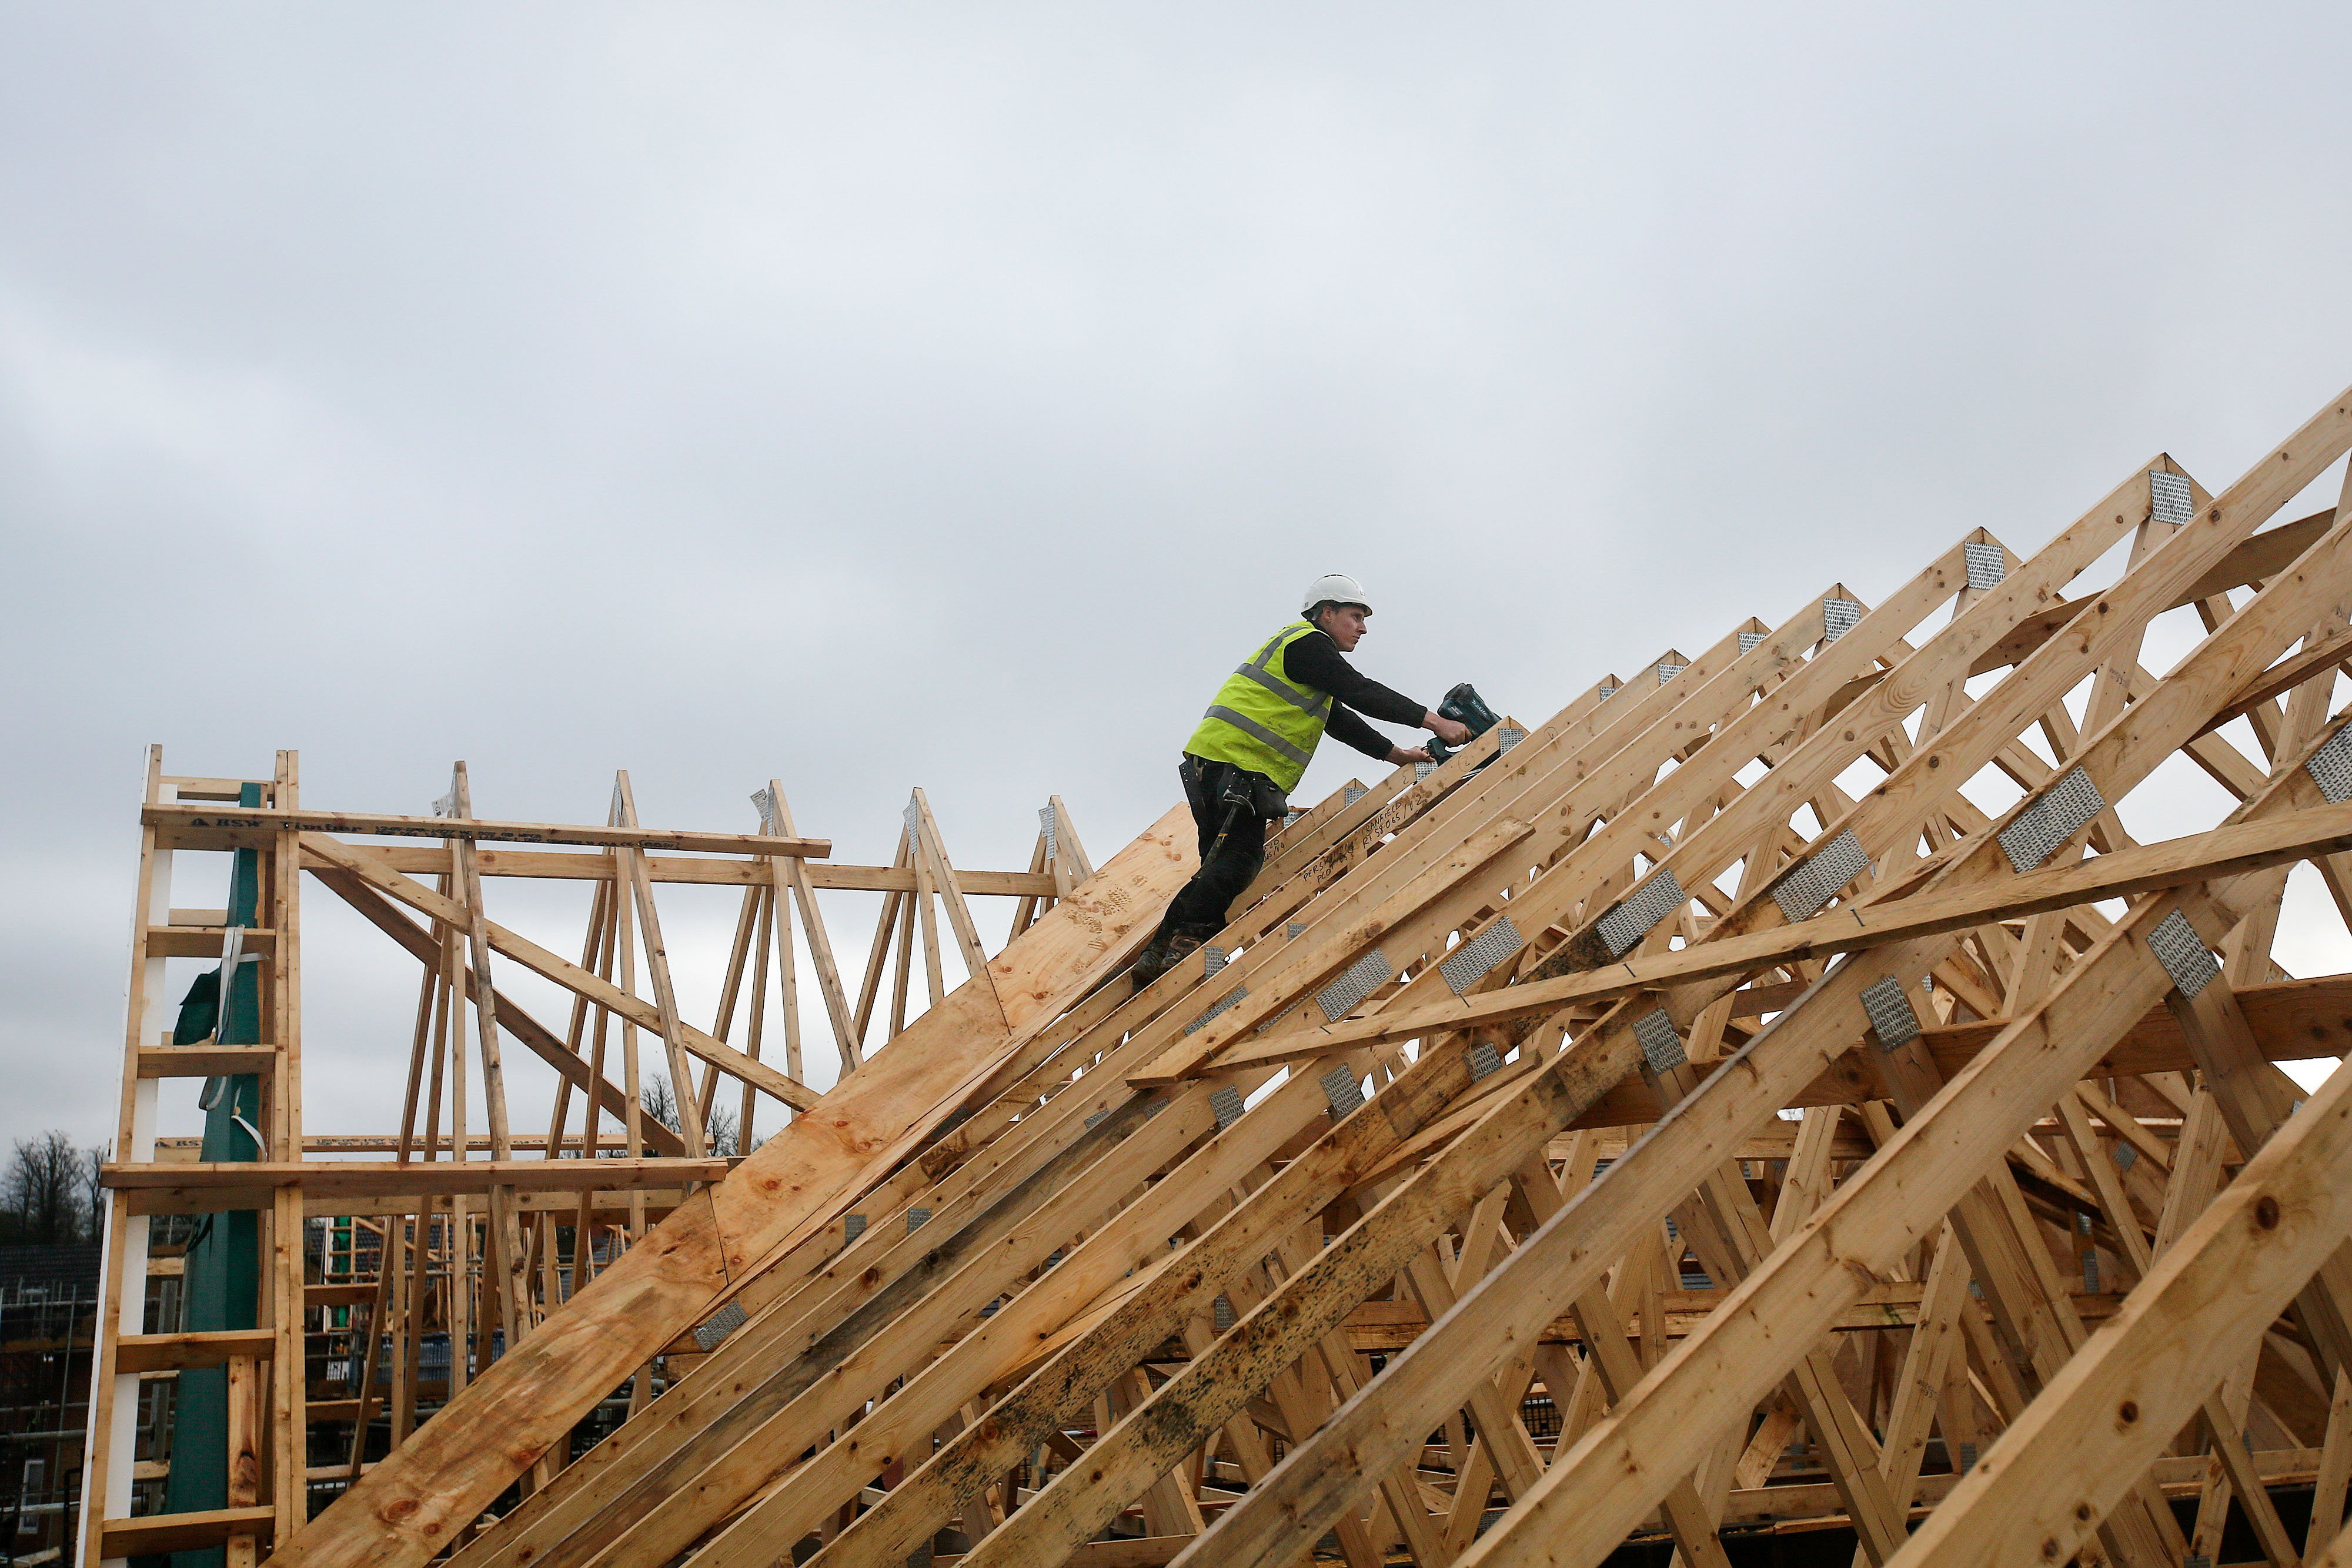 A builder climbs across roof timbers at a Persimmon Plc residential property construction site in Cranfield, U.K., on Tuesday, Jan. 6, 2016. The average price of a home rose 0.8 percent to 196,999 pounds ($292,100) from November, the most since April, Nationwide Building Society said in a statement released at the end of December. Photographer: Simon Dawson/Bloomberg ORG XMIT: 598456449